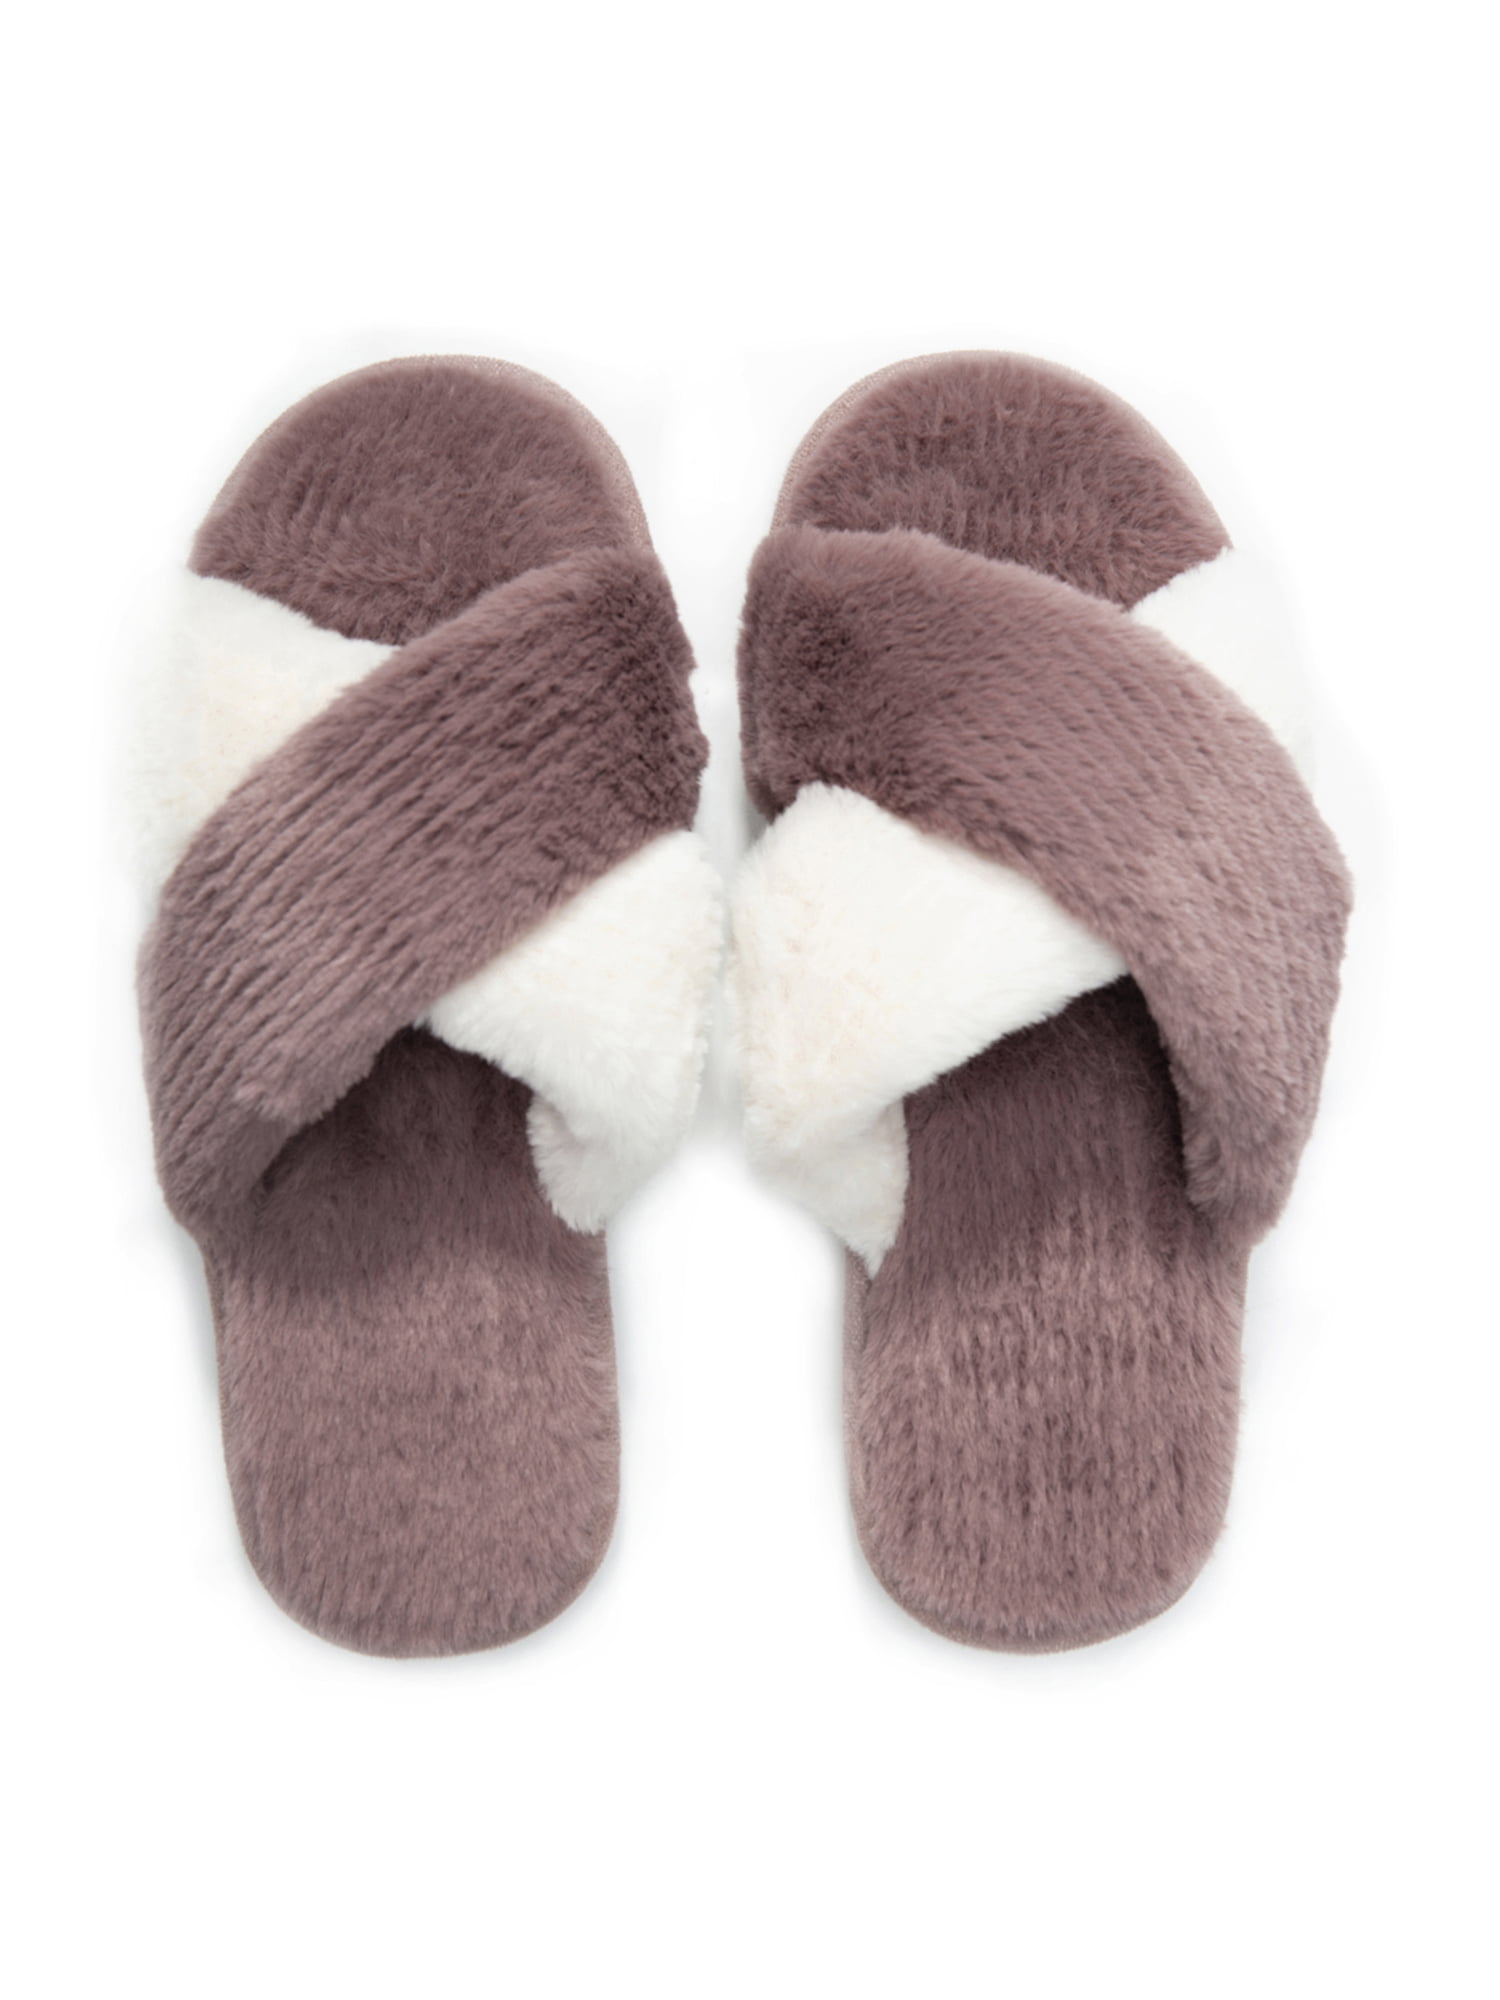 Crazy Lady Women's Fuzzy Fluffy Furry Fur Slippers Flip Flop Open Toe Cozy House Memory Foam Sandals Slides Soft Flat Comfy Anti-Slip Spa Indoor Outdoor Slip on